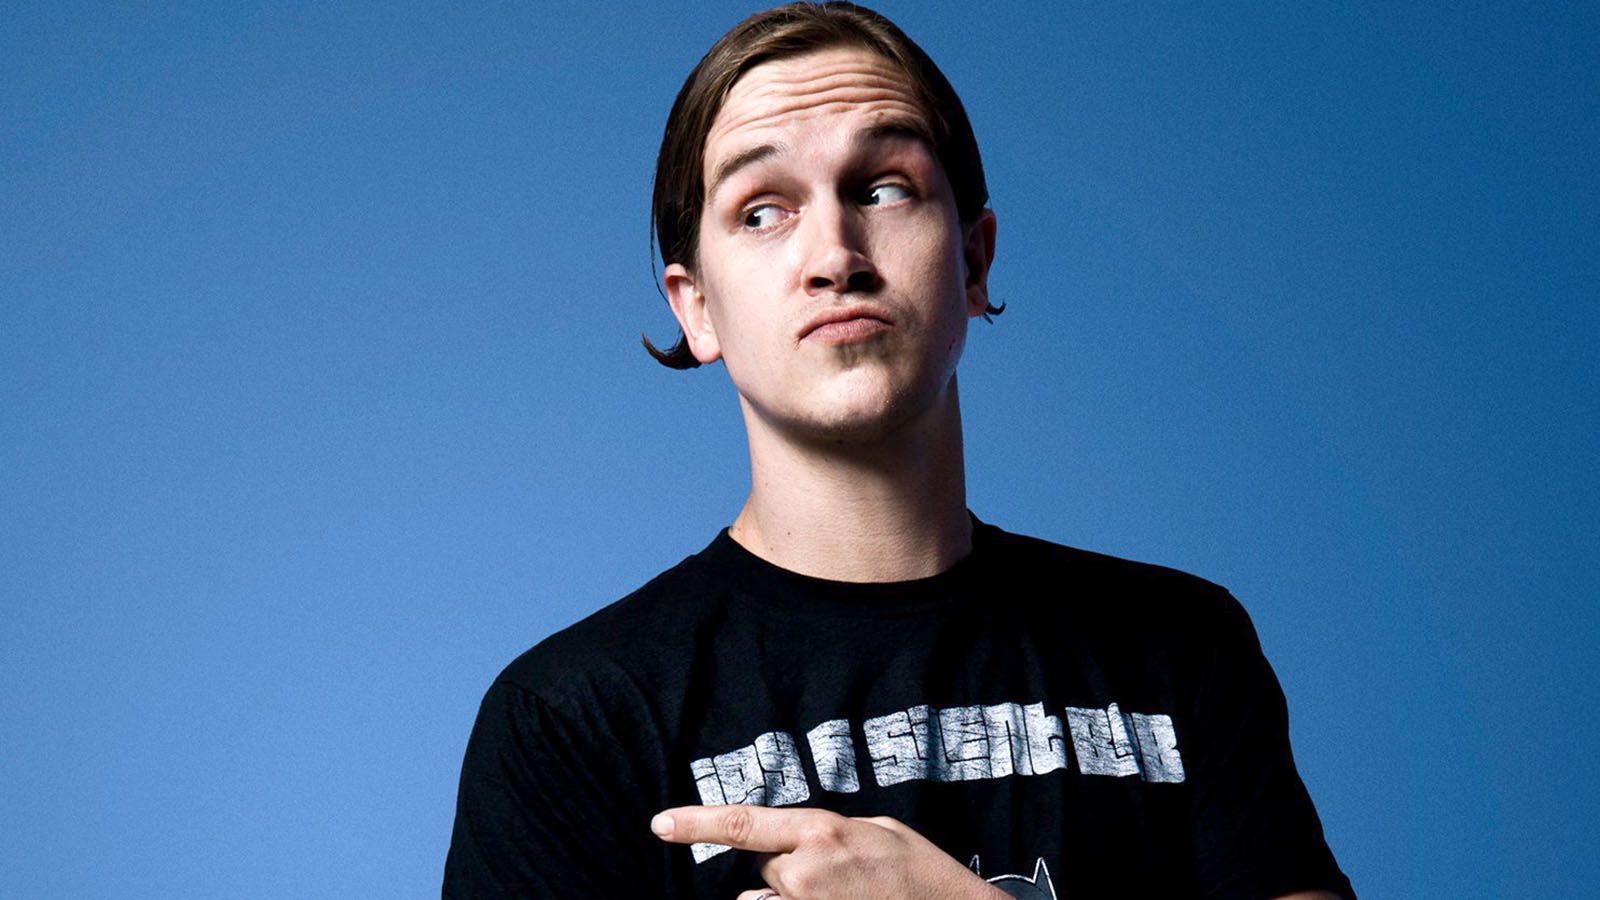 Jason Mewes will at Summit City Comedy Club from March 9-10.